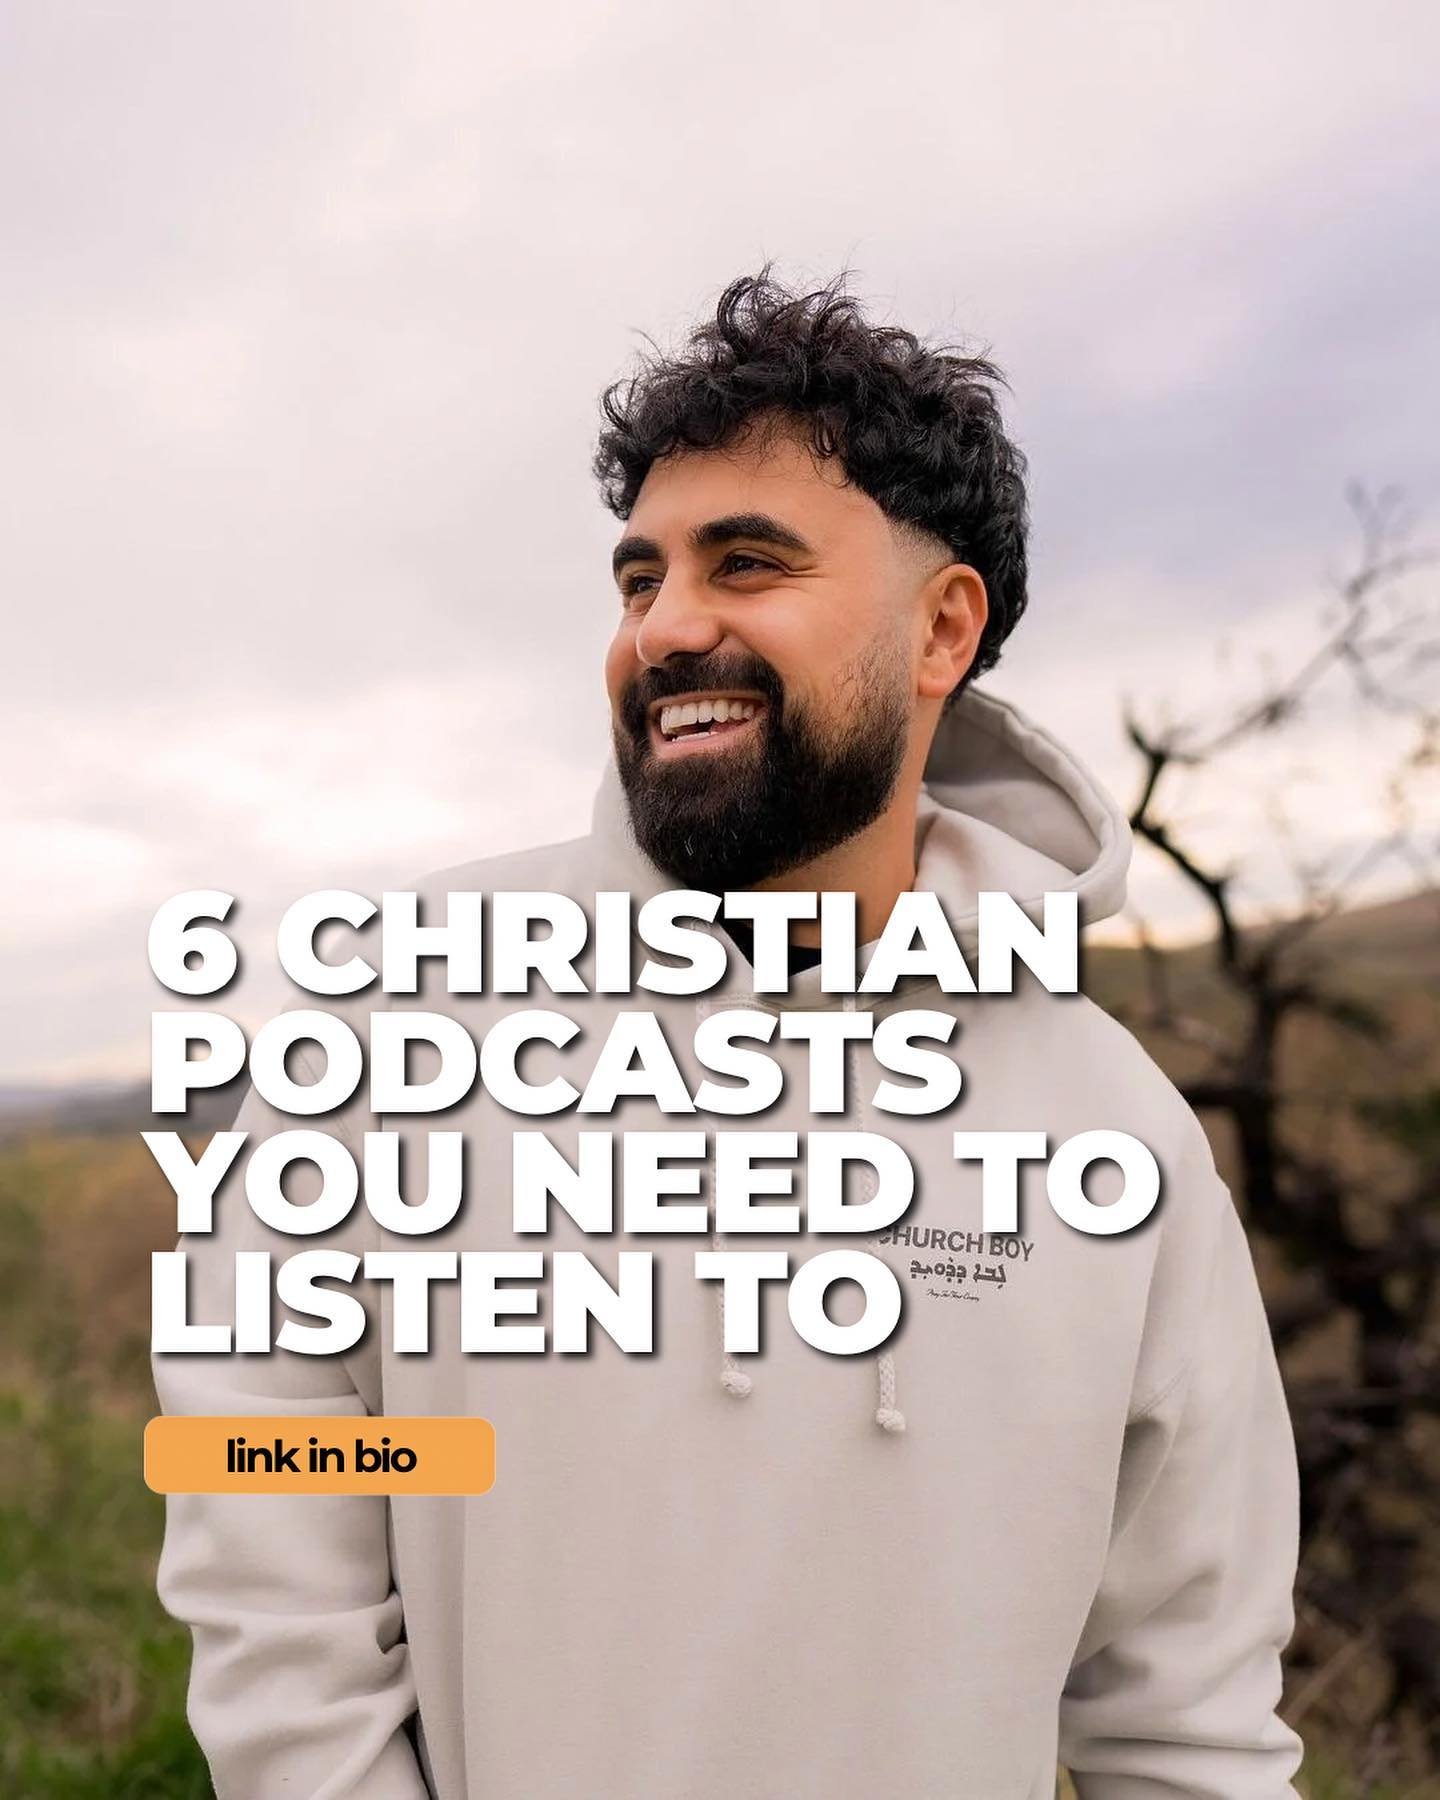 The good old days of radio have stepped up their game and turned into something even better: podcasts. But with the ever-expanding universe of podcasts throwing up new choices everyday, how does anyone know where to begin? And what are the best *Chri